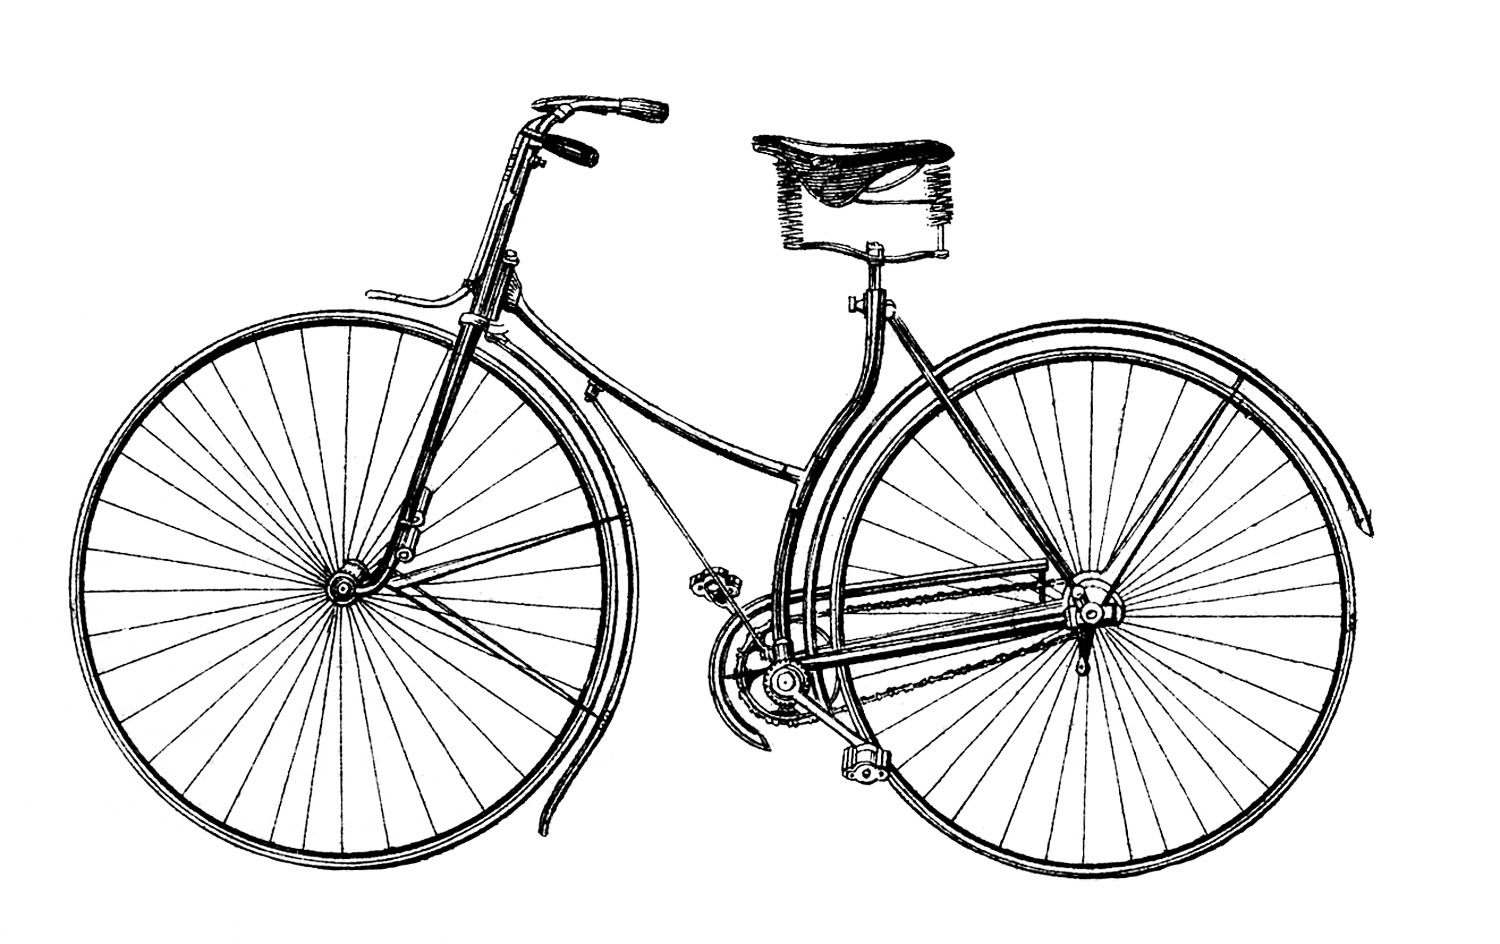 Free Vector Downloads - Vintage Bicycle - The Graphics Fairy